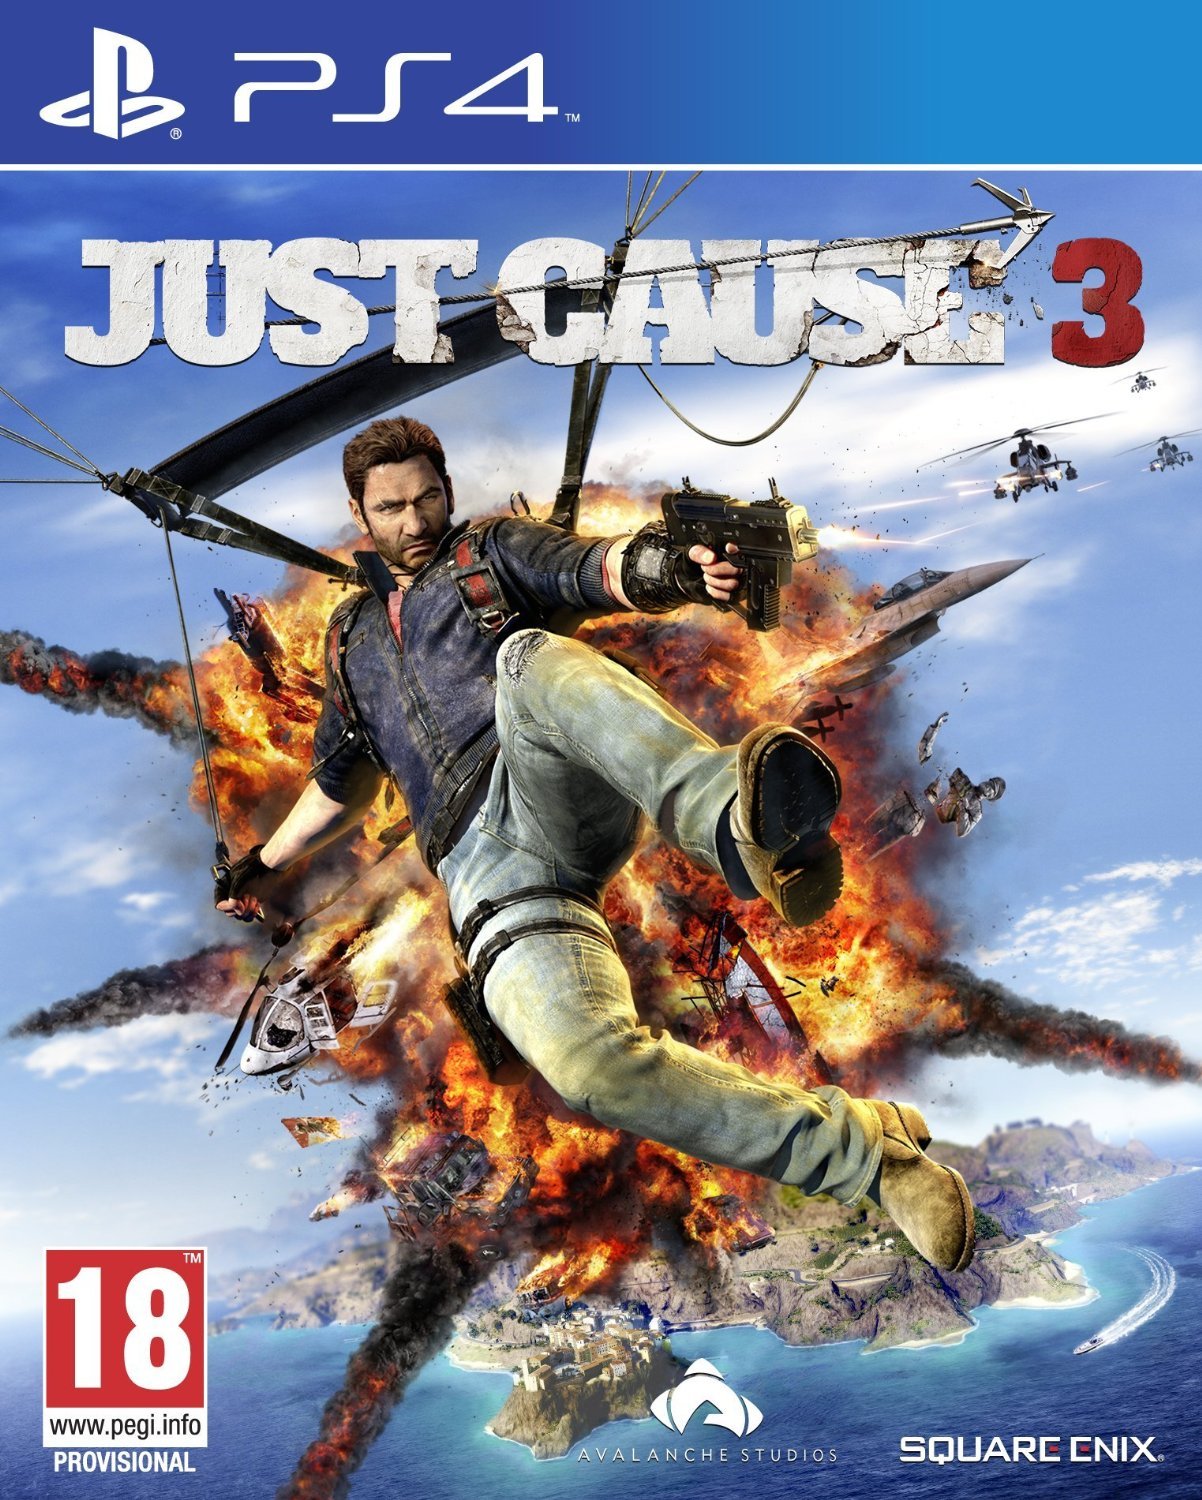 Just Cause 3 - PS4 Game